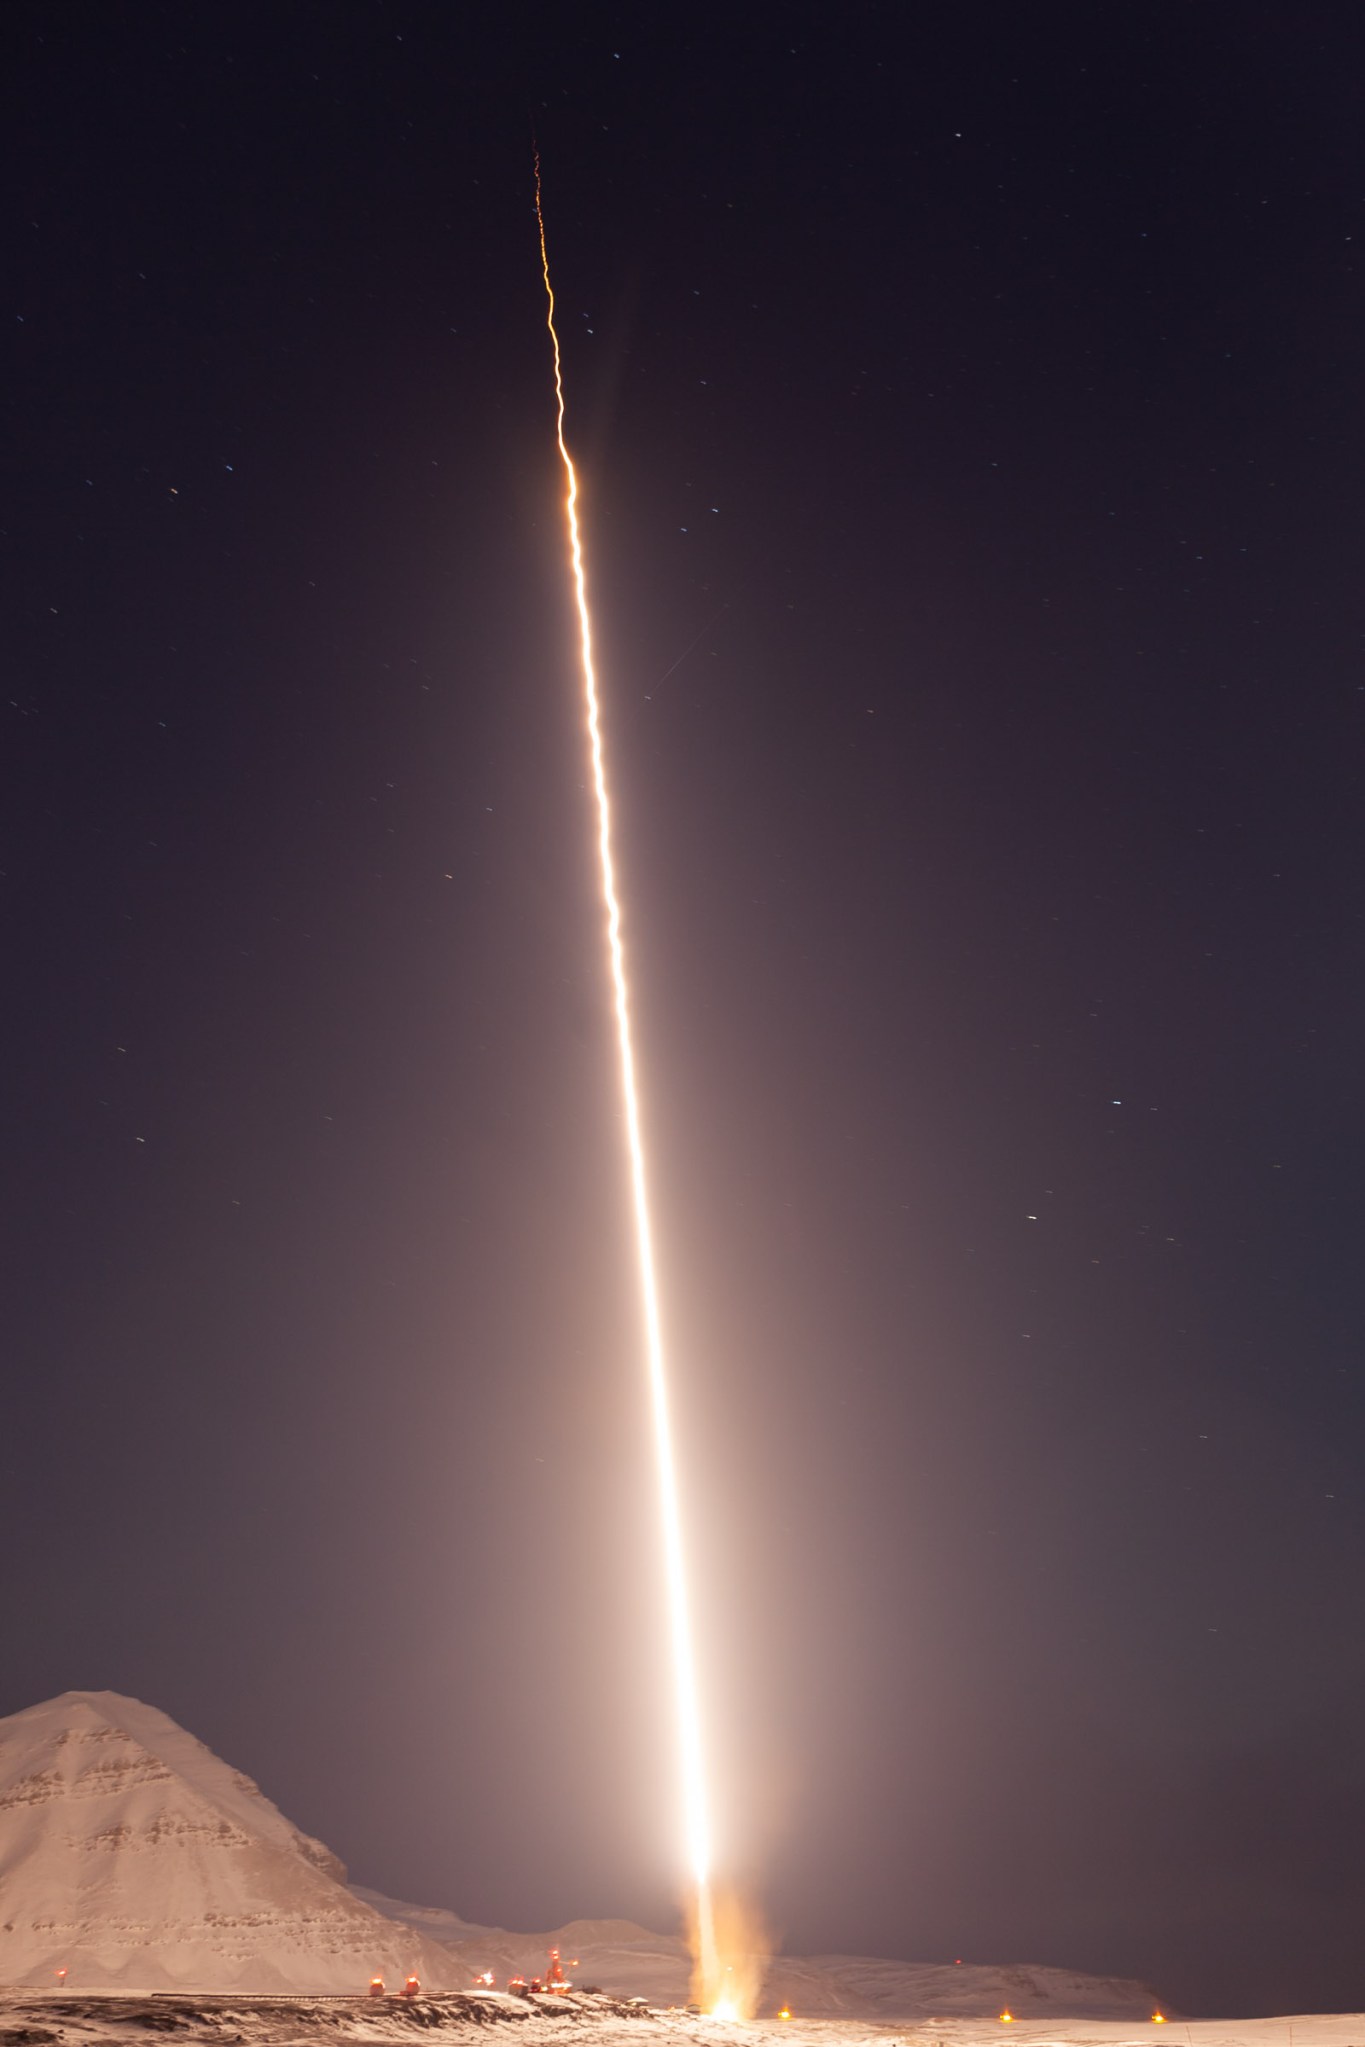 Sounding rocket launch from Ny-Ålesund site